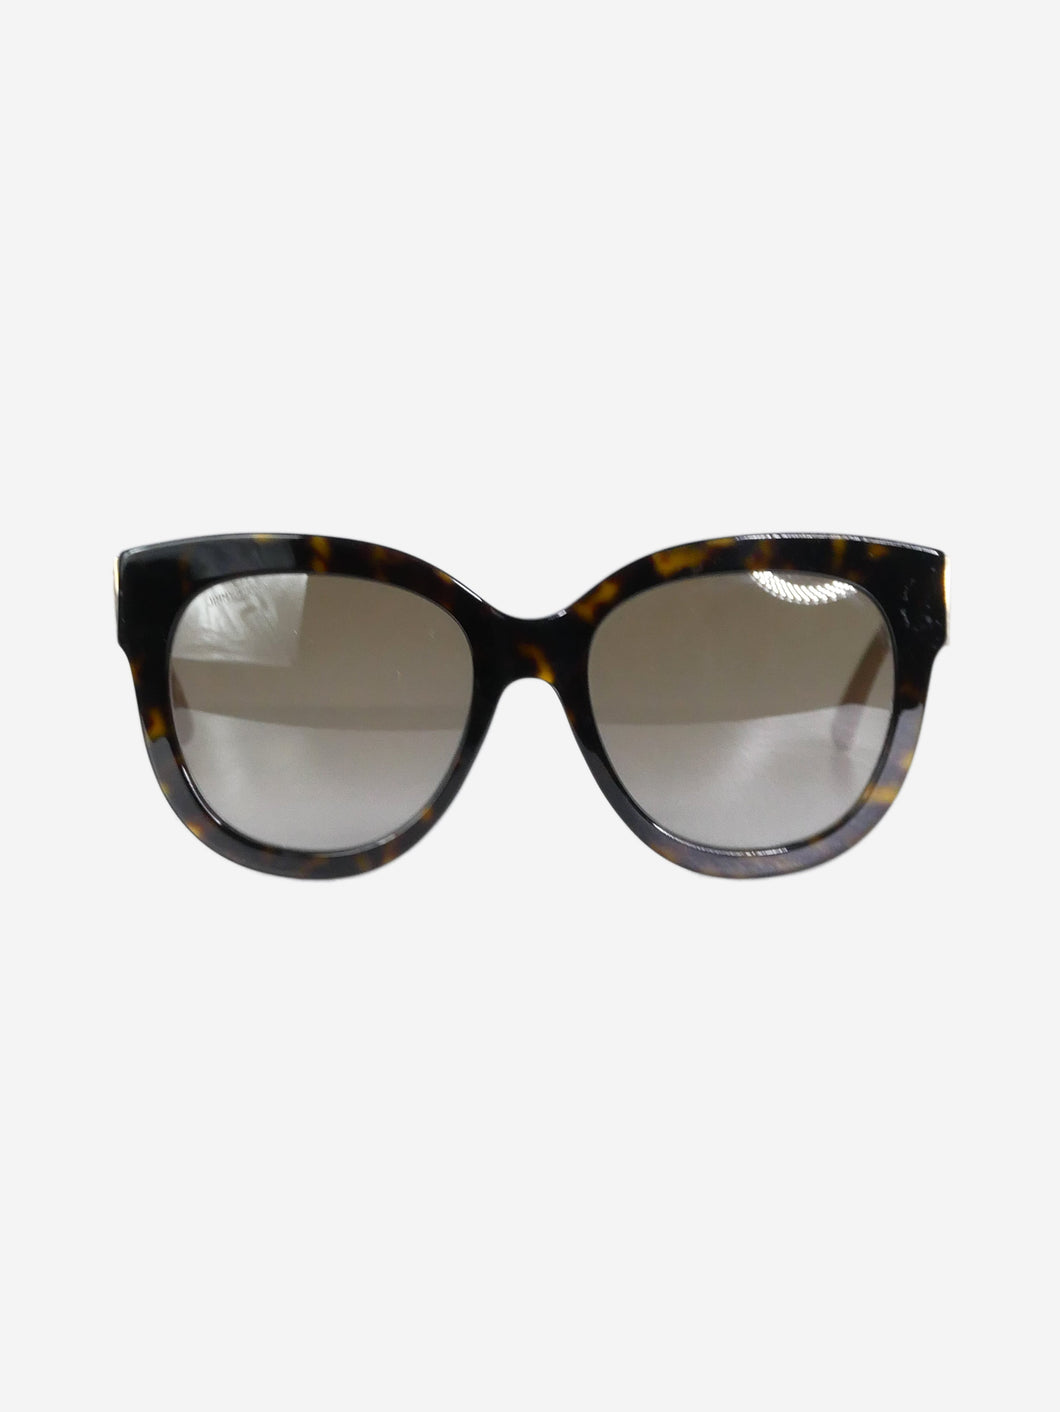 Brown tortoise shell round sunglasses with brand details at arm Sunglasses Jimmy Choo 